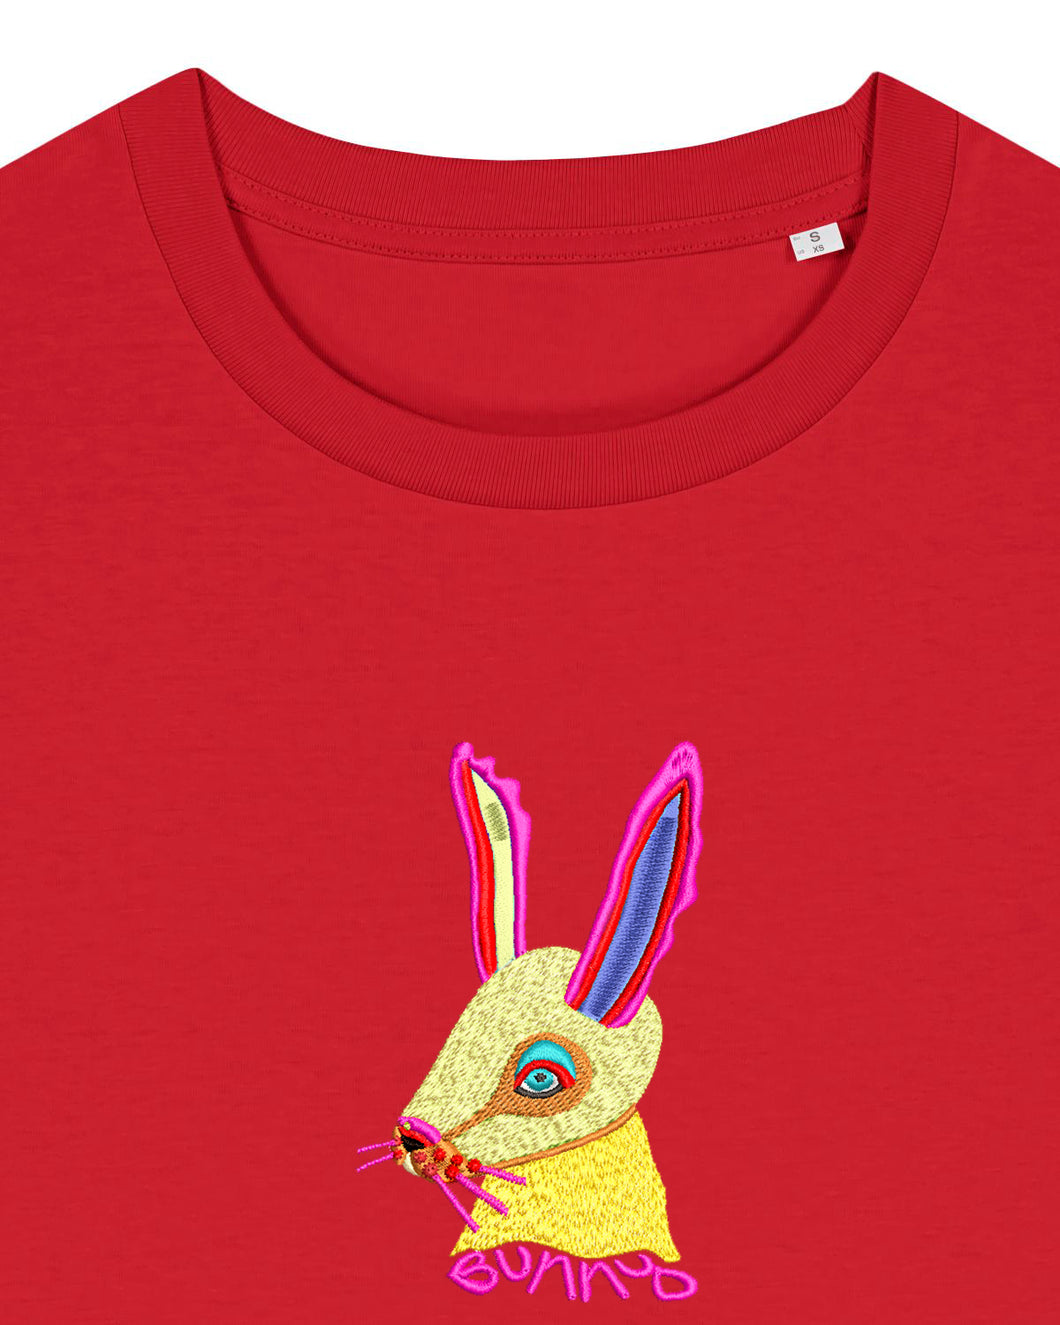 BUNNY 🐰- Embroidered WOMEN'S T-SHIRT